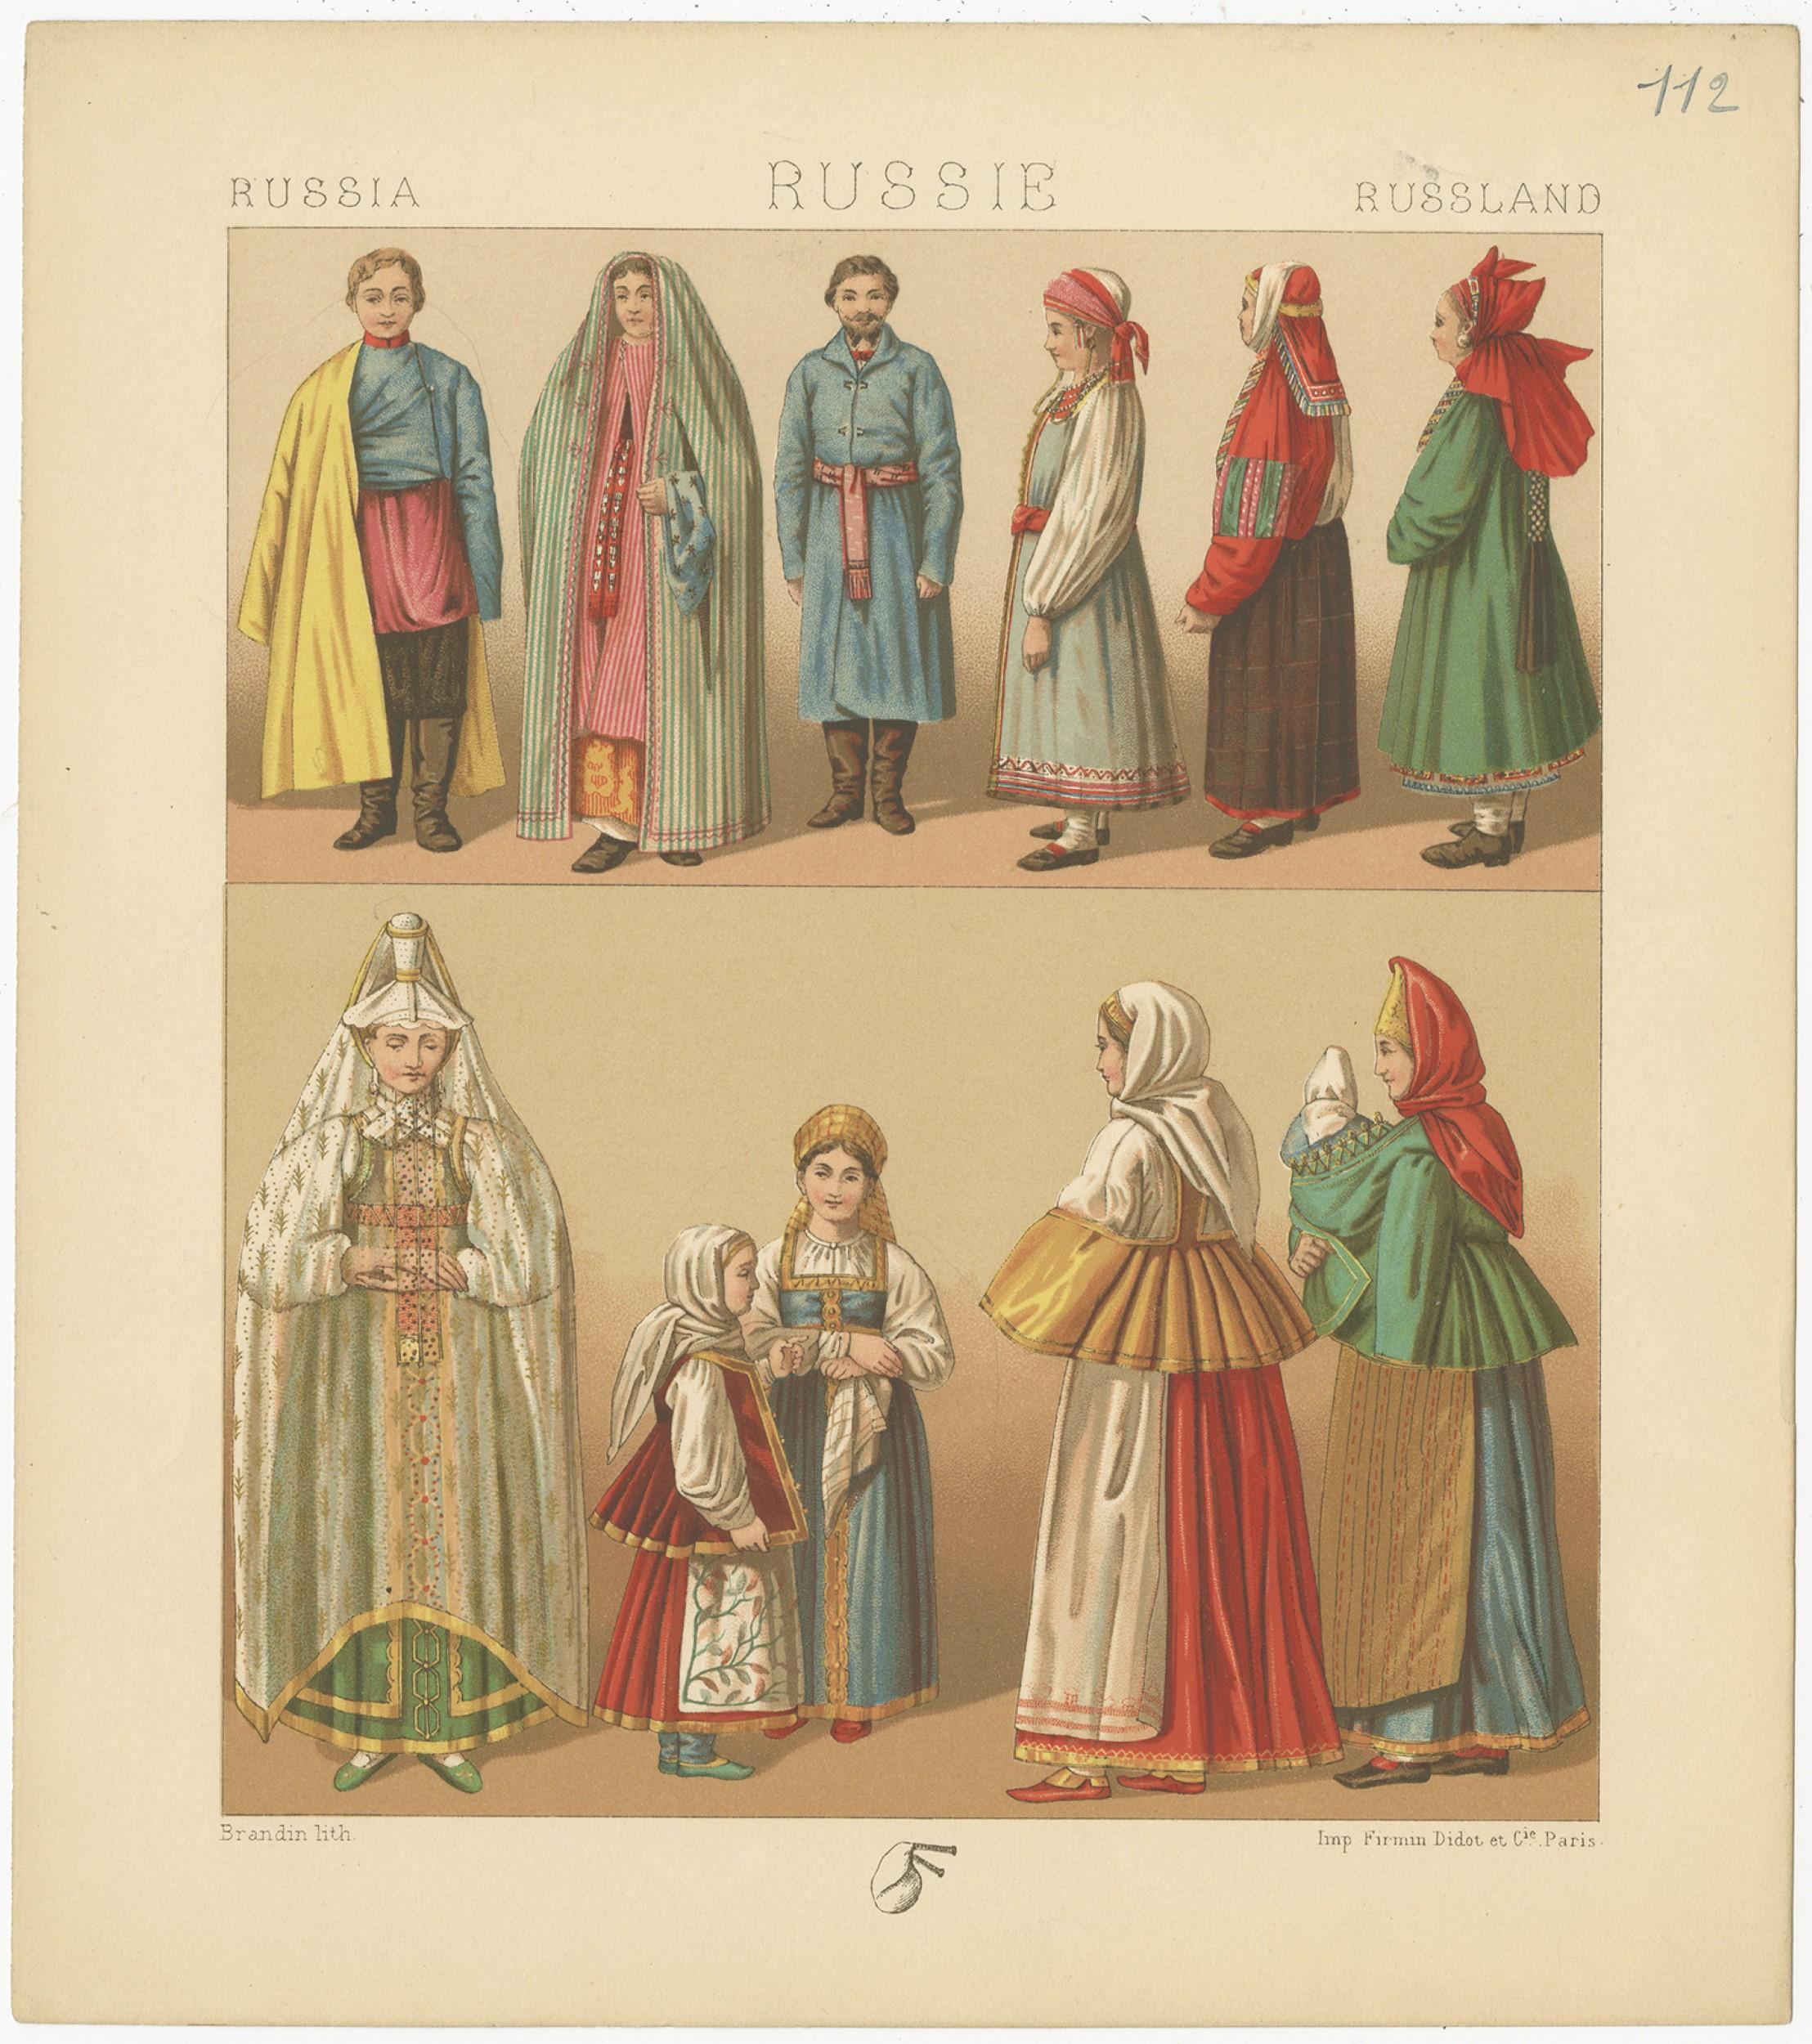 Antique print titled 'Russia - Russie - Russland'. Chromolithograph of Russian Women's Kokoshnik. This print originates from 'Le Costume Historique' by M.A. Racinet. Published, circa 1880.